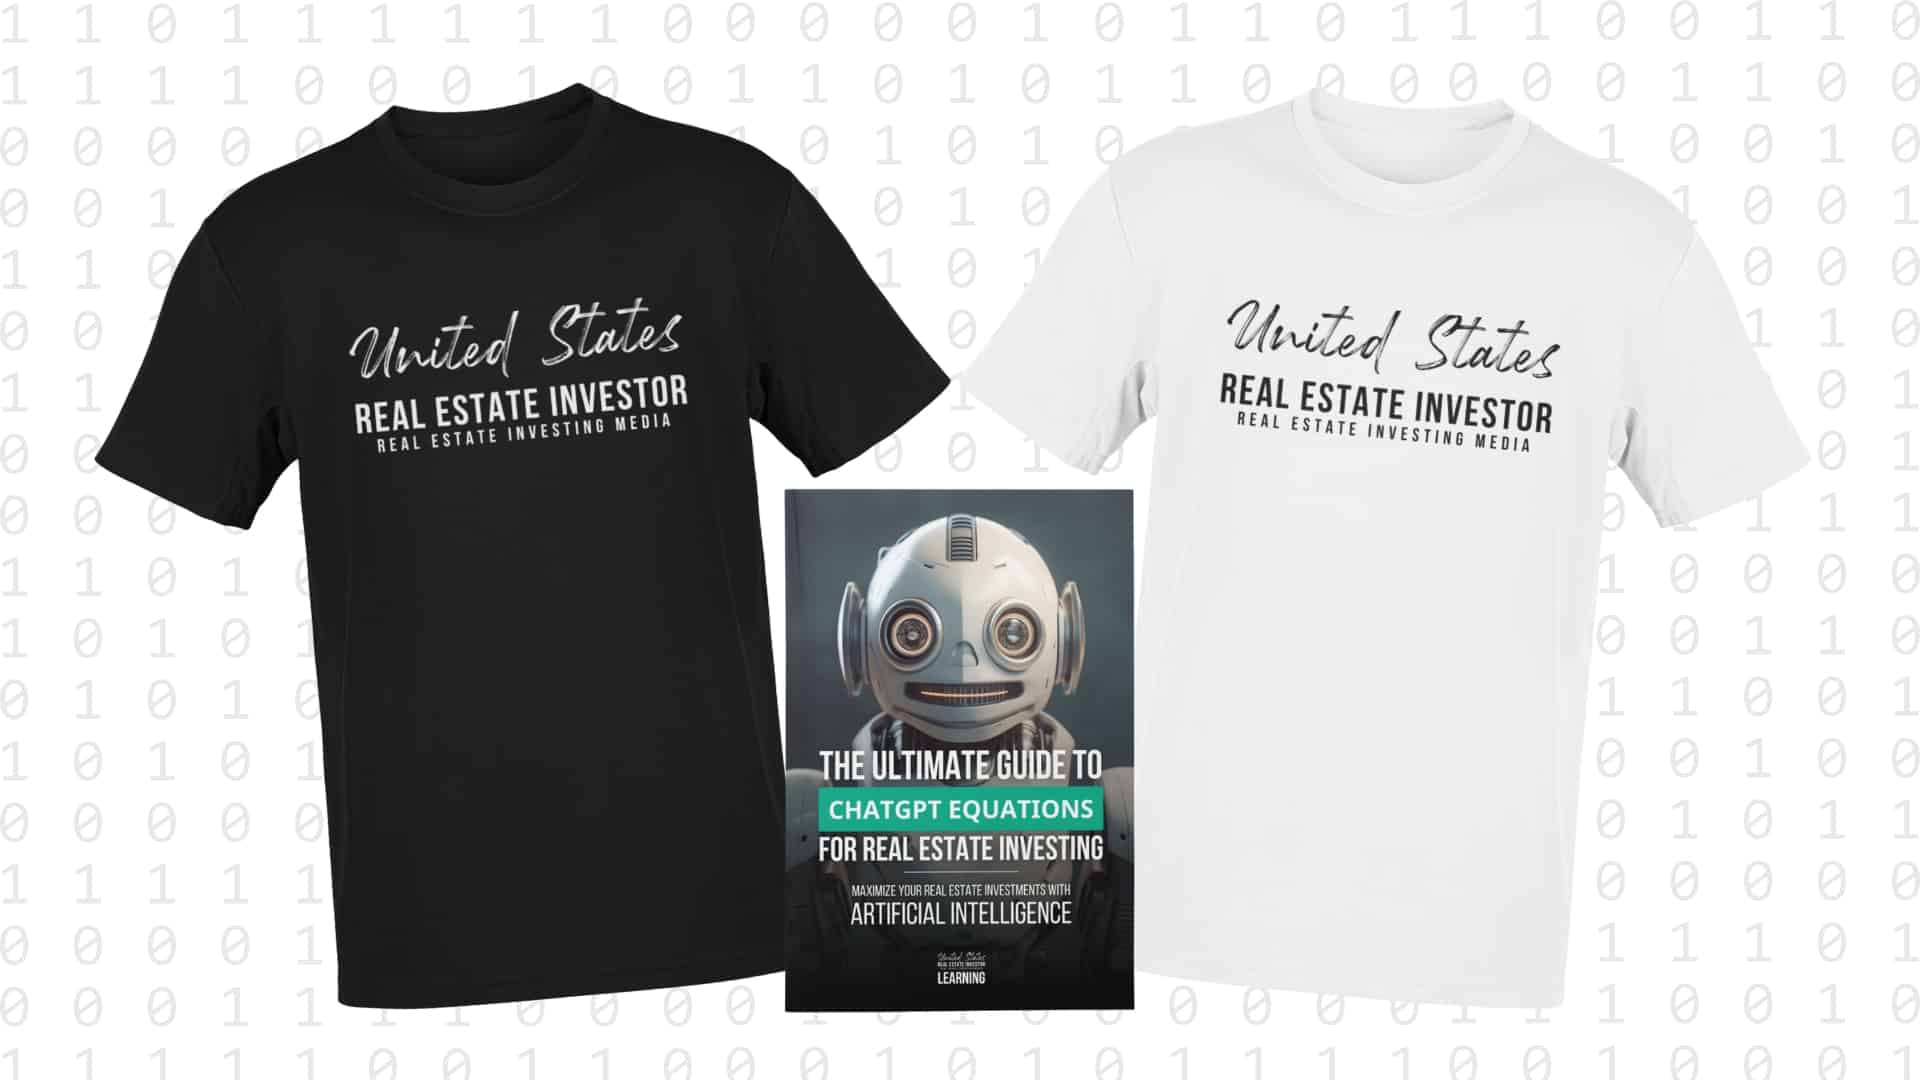 The Ultimate Guide to ChatGPT Equations for Real Estate Investing ebook and USREI t-shirt bundle